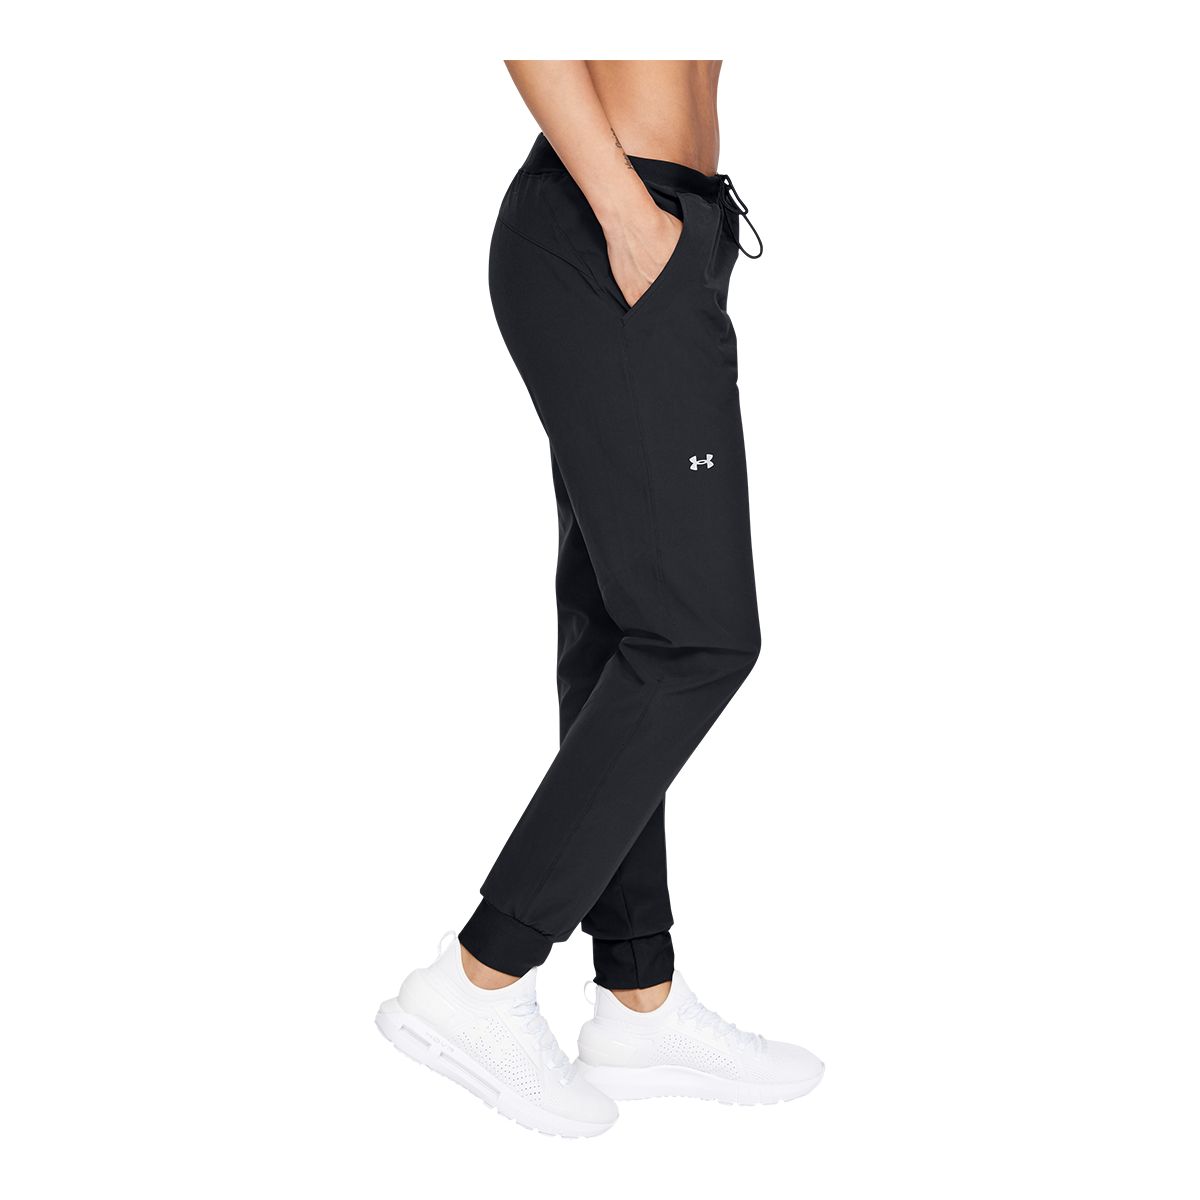 https://media-www.sportchek.ca/product/div-03-softgoods/dpt-70-athletic-clothing/sdpt-02-womens/333644166/ua-w-armour-sport-woven-pant-c67f21f6-8c8b-43f1-8f34-8655285cd728-jpgrendition.jpg?imdensity=1&imwidth=1244&impolicy=mZoom